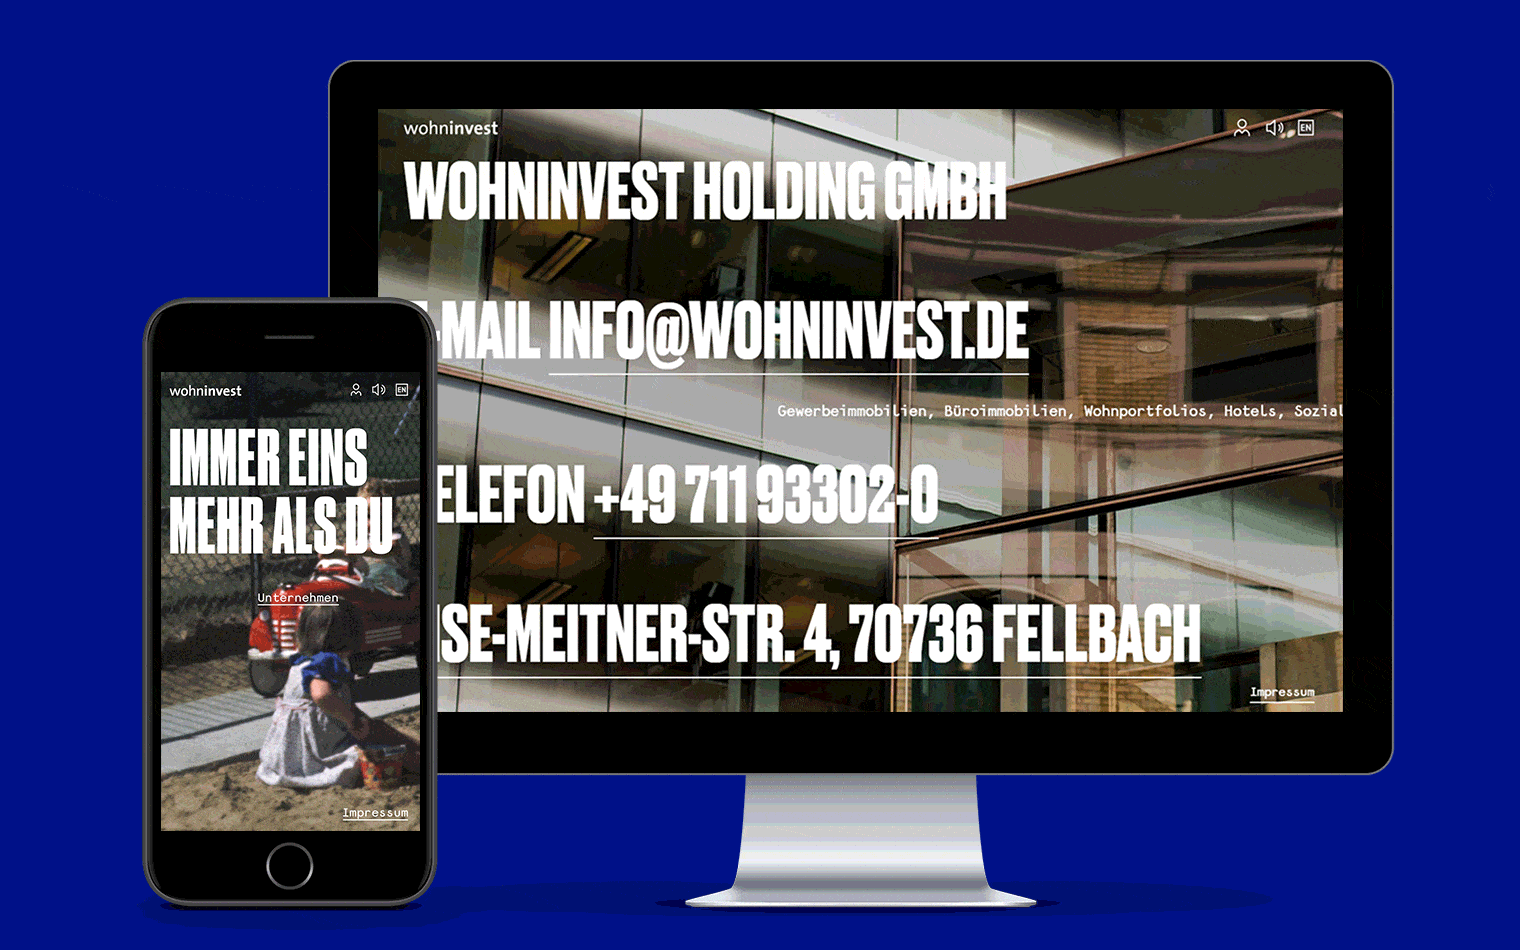 This animated gif shows the redesigned homepage in the mobile and the desktop view of the Wohninvest Holding GmbH.